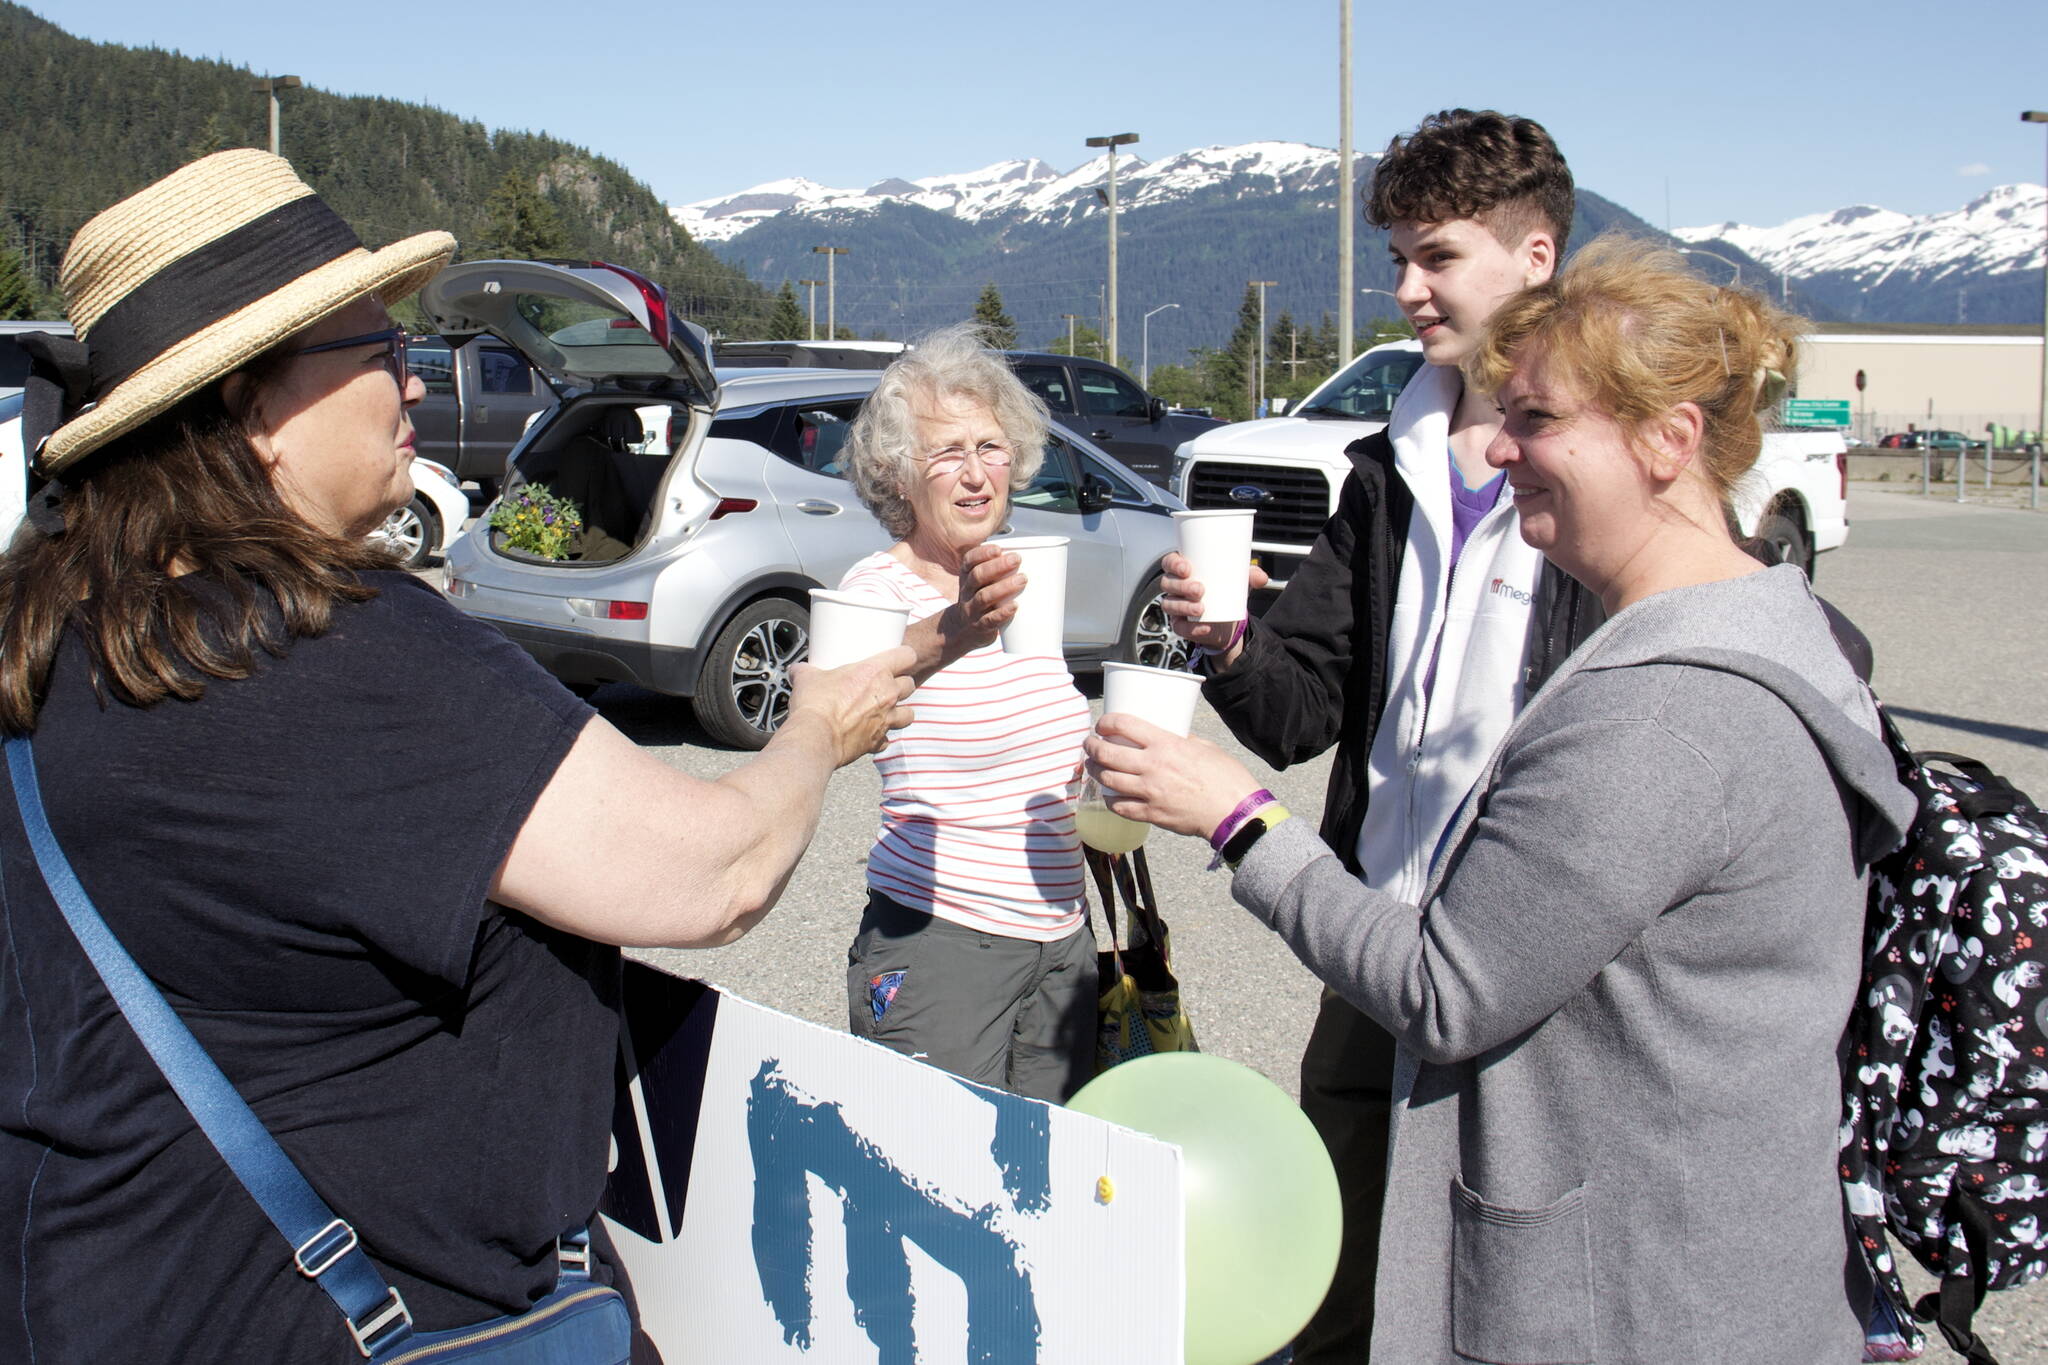 Iryna Hrynchenko and her 18 year old son, Ivan Hrynchenko, 18, Joyanne Bloom and Bridget Smith toast to the Ukrainians’ arrival Saturday, June 25, 2022, at Juneau Airport. Bloom and Smith are part of a five-person group of residents who raised funds to bring the Hrynchenkos to Juneau, and is helping them with housing, education and job opportunities, and in other ways. (Mark Sabbatini / Juneau Empire)